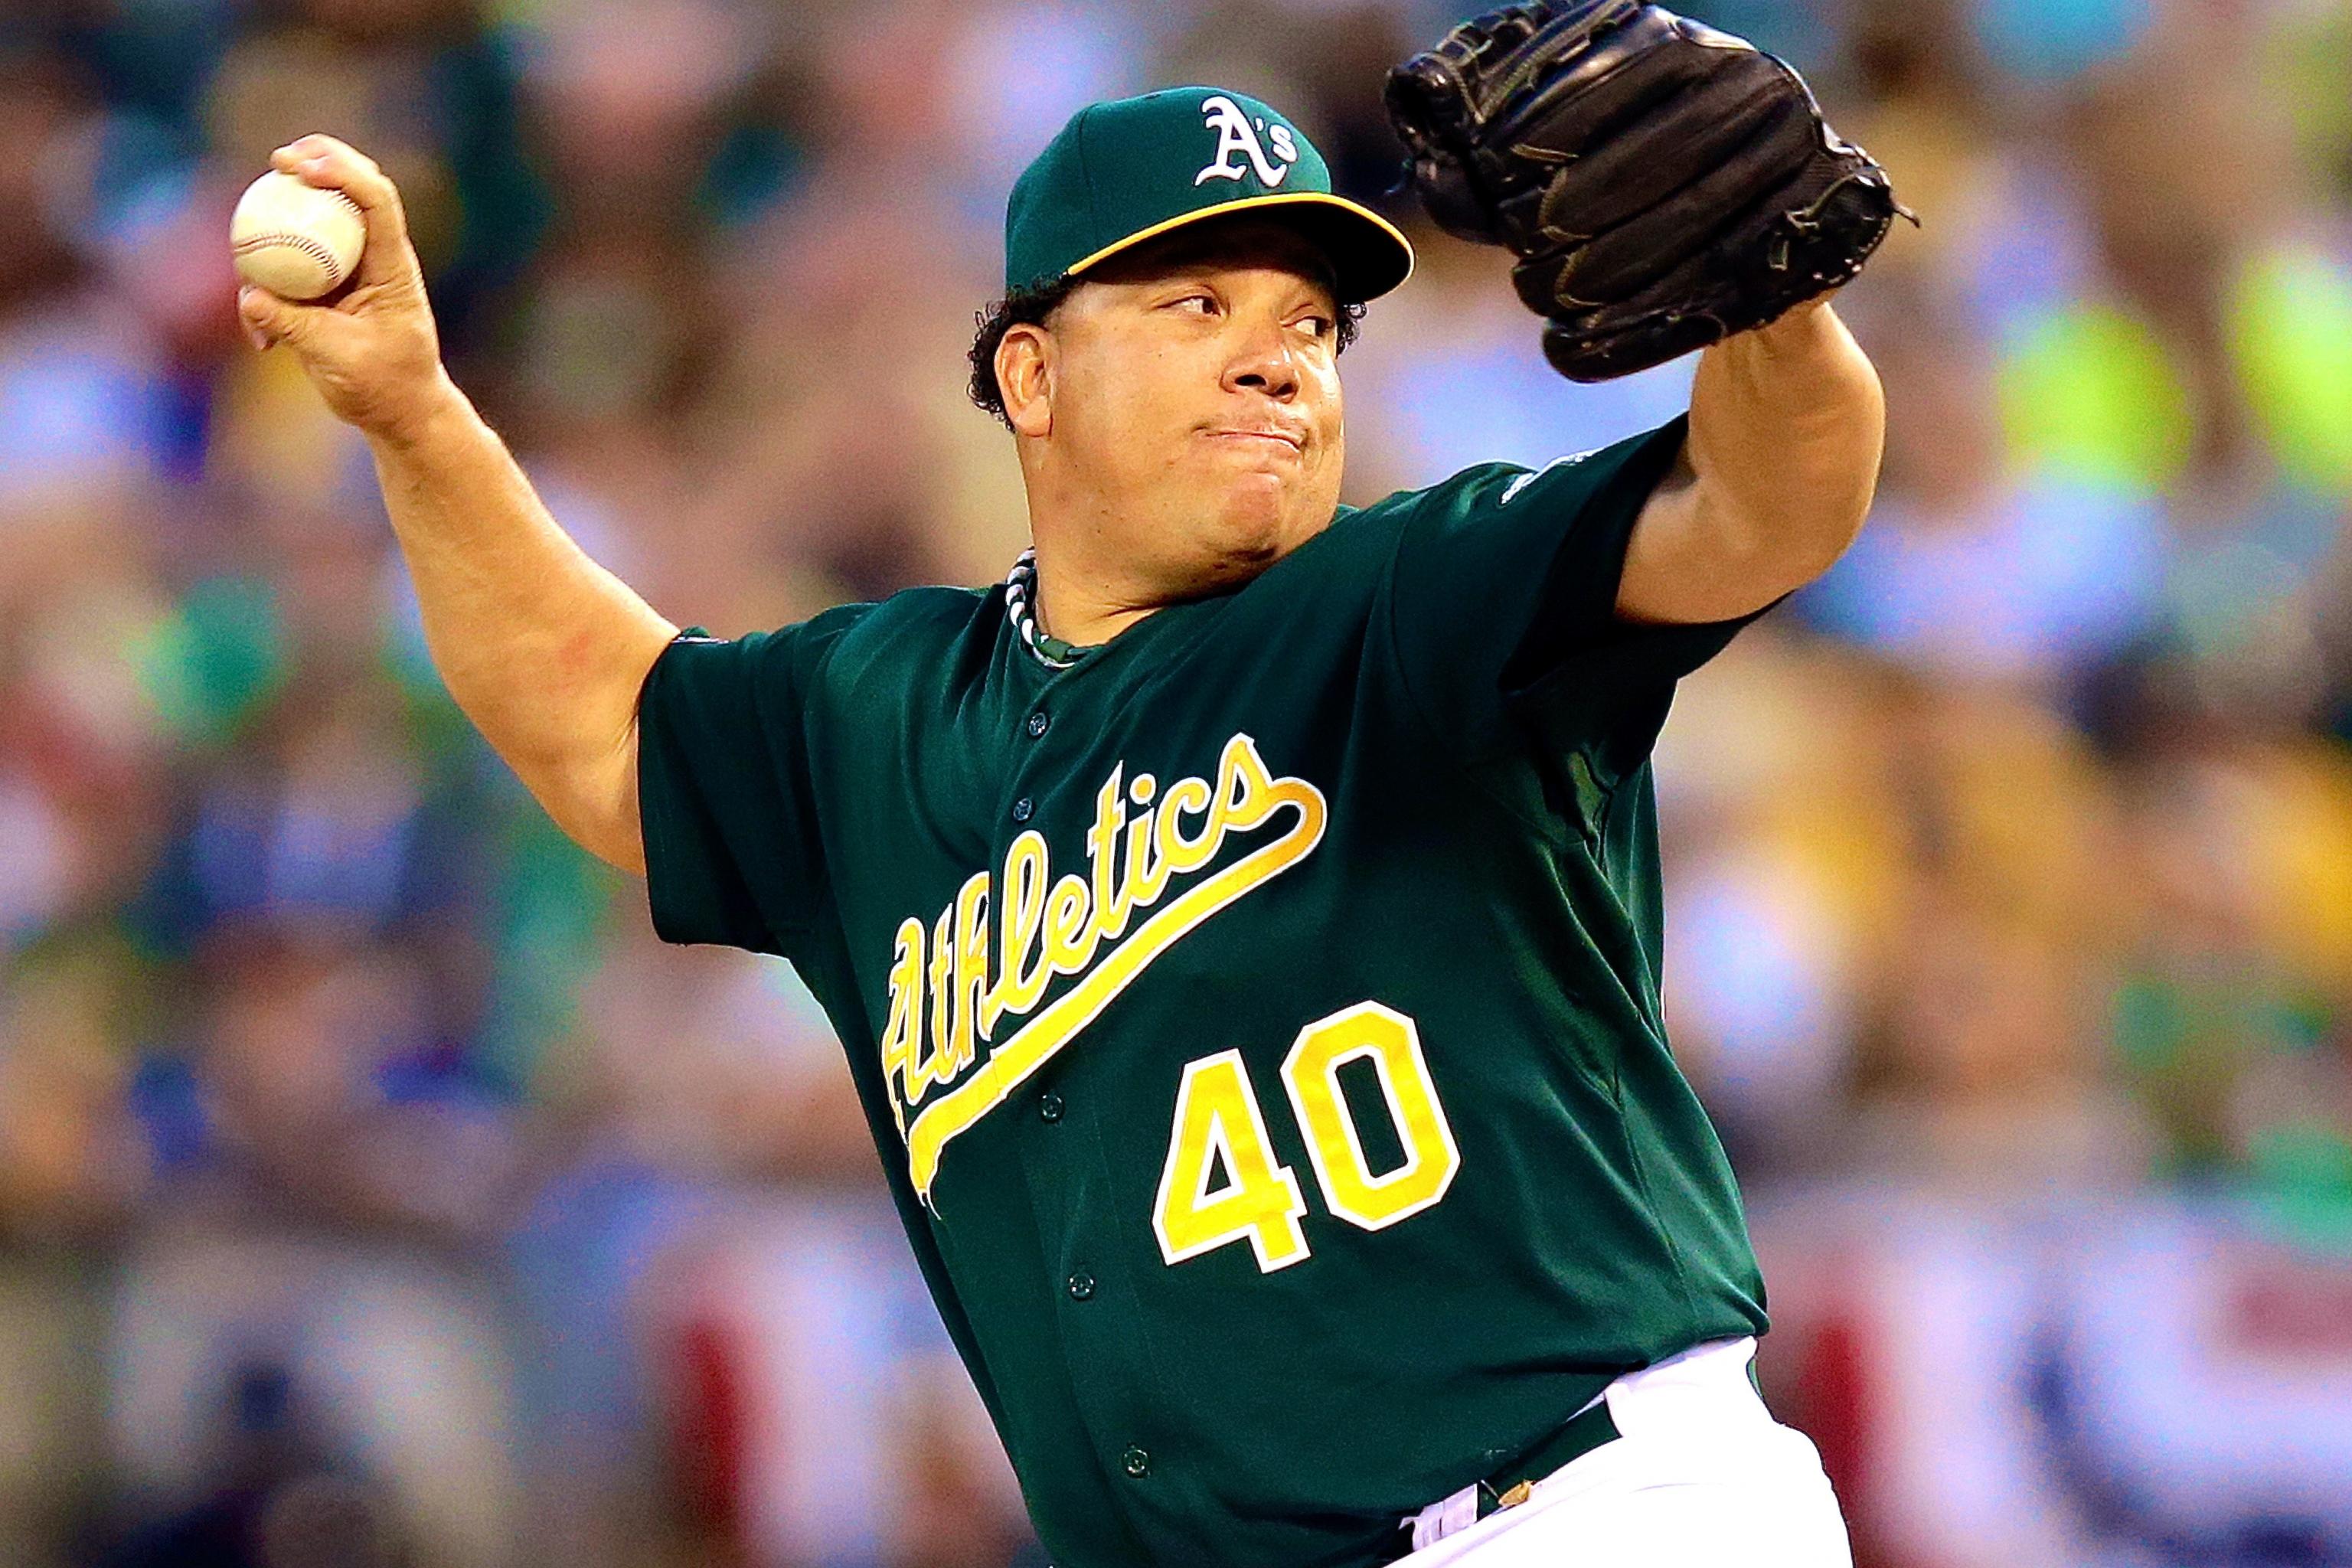 New York Mets pitcher Bartolo Colon skips court hearing over